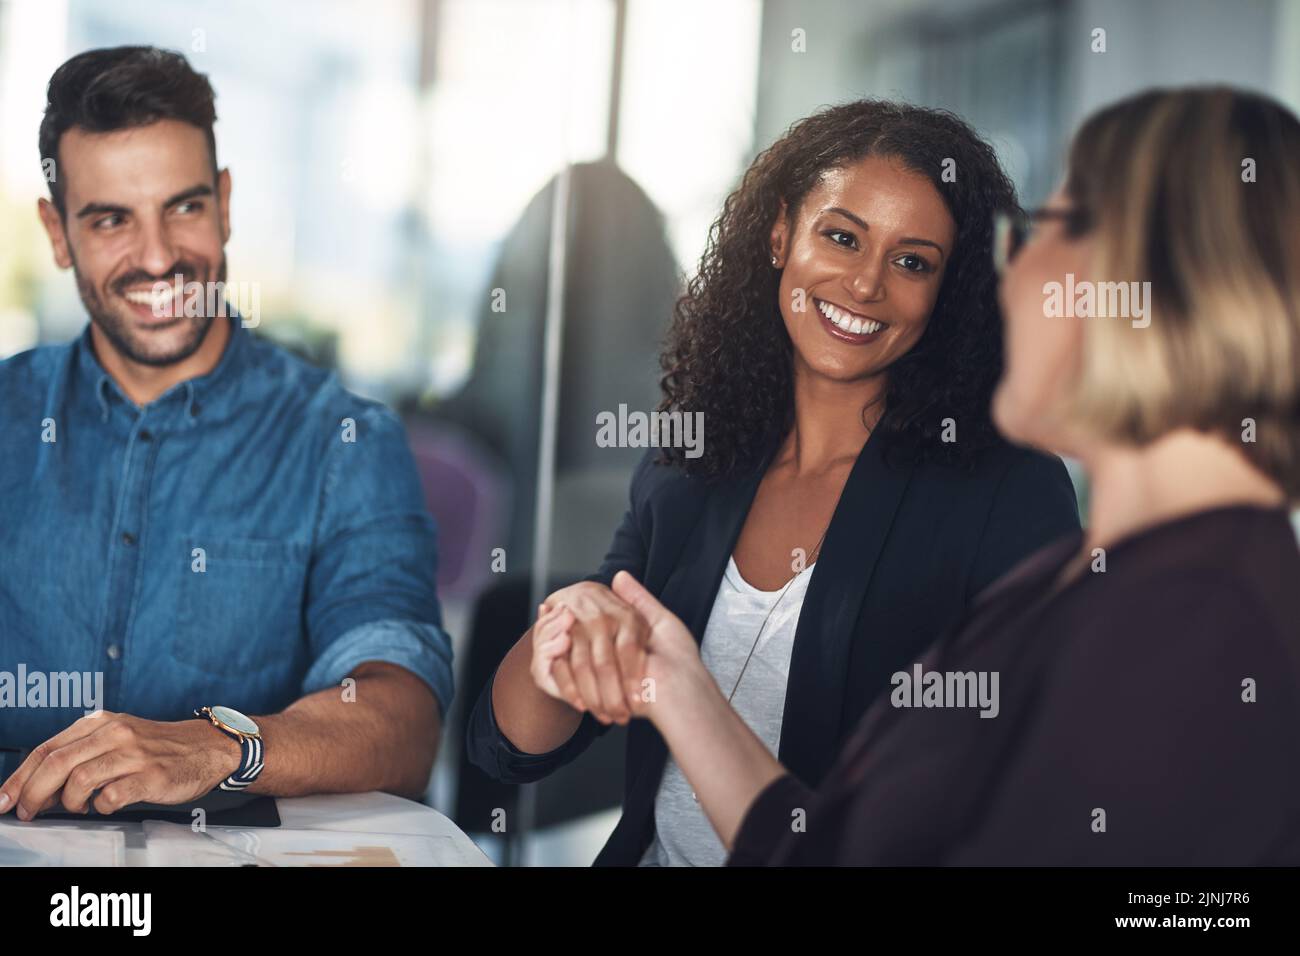 Handshake, collaboration and business deal while introducing, congratulating and wishing a colleague good luck for leadership promotion. Diverse Stock Photo